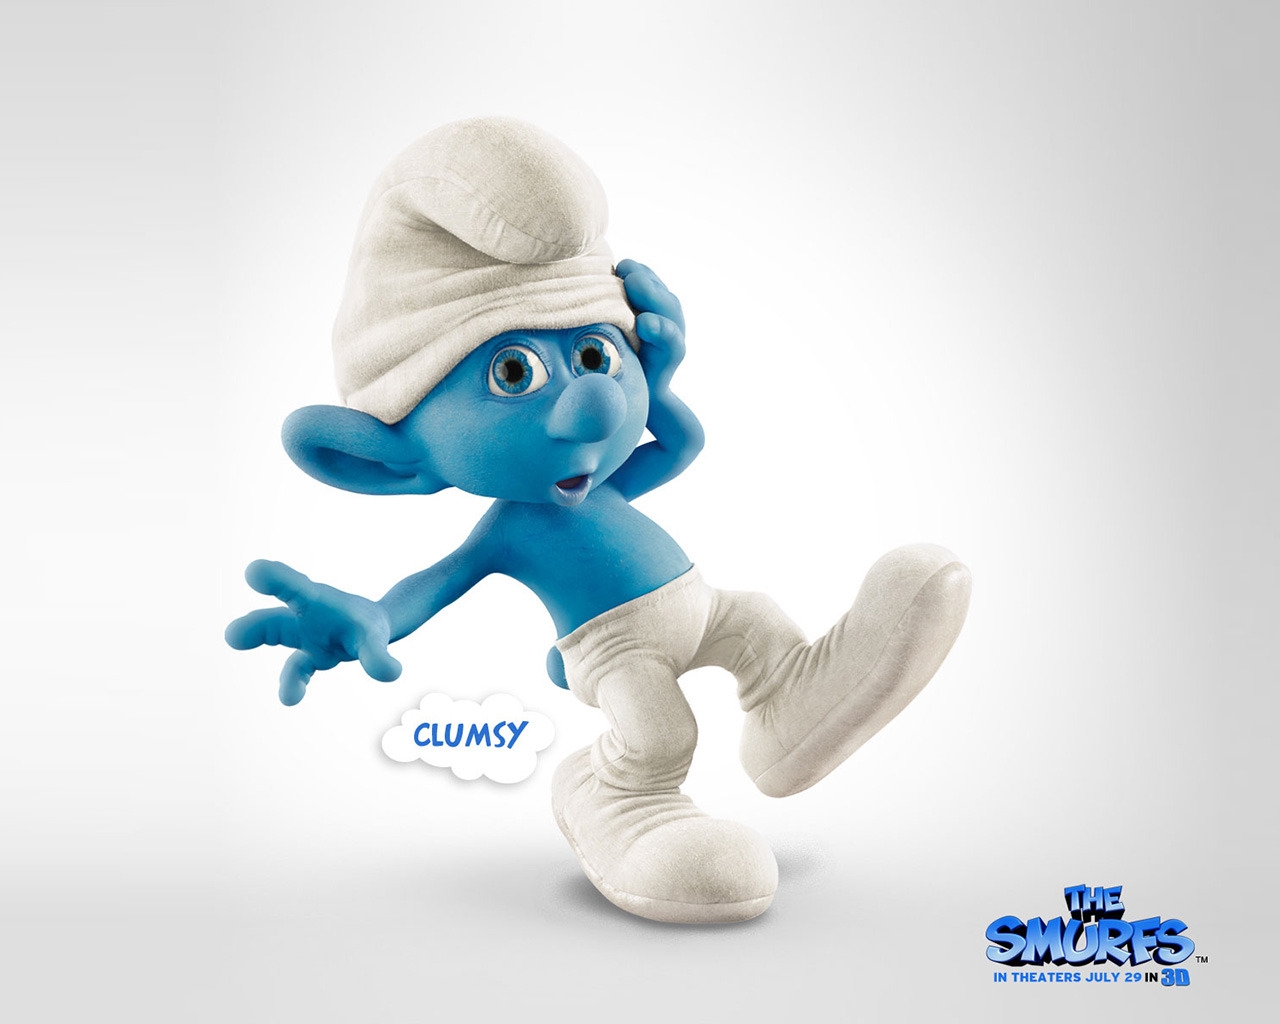 Clumsy Smurfs 2 for 1280 x 1024 resolution